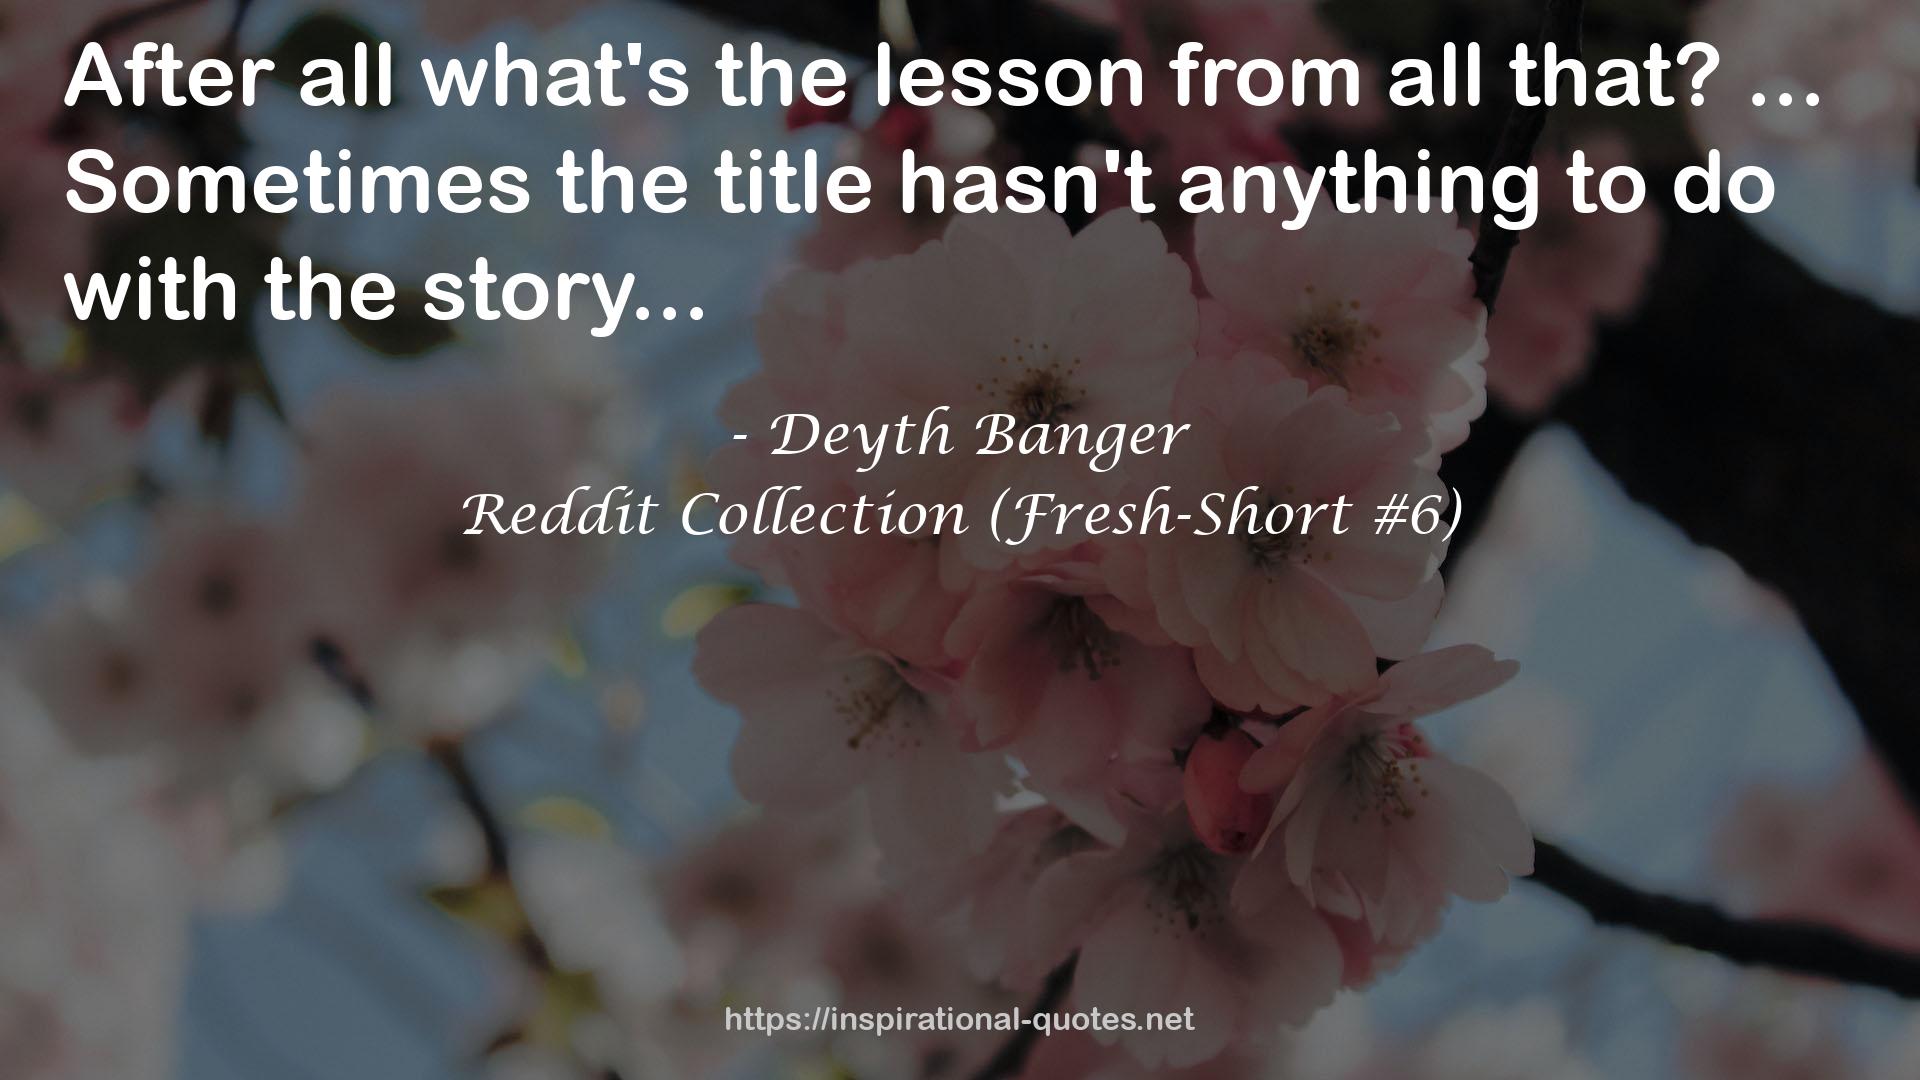 Reddit Collection (Fresh-Short #6) QUOTES